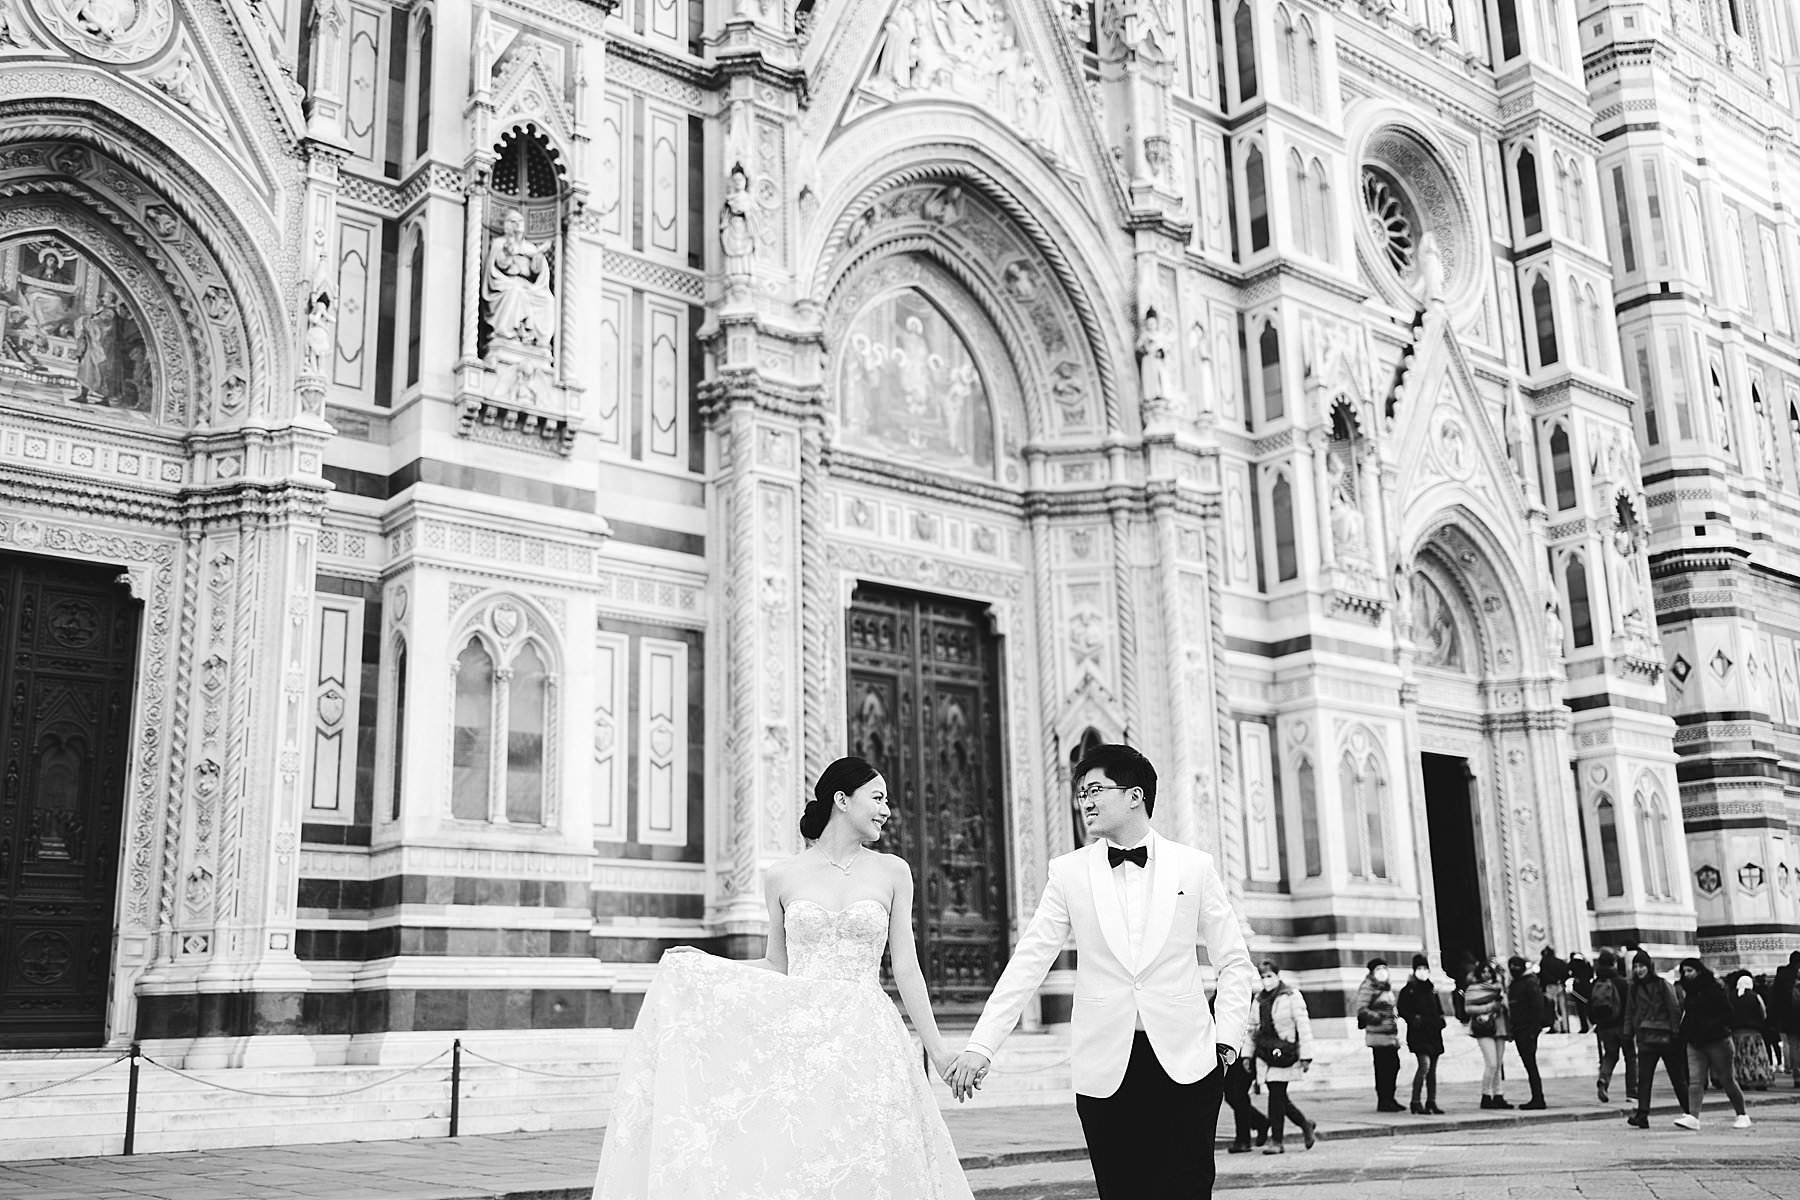 Beautiful winter pre-wedding photo session in Florence near the Duomo with white wedding outfits